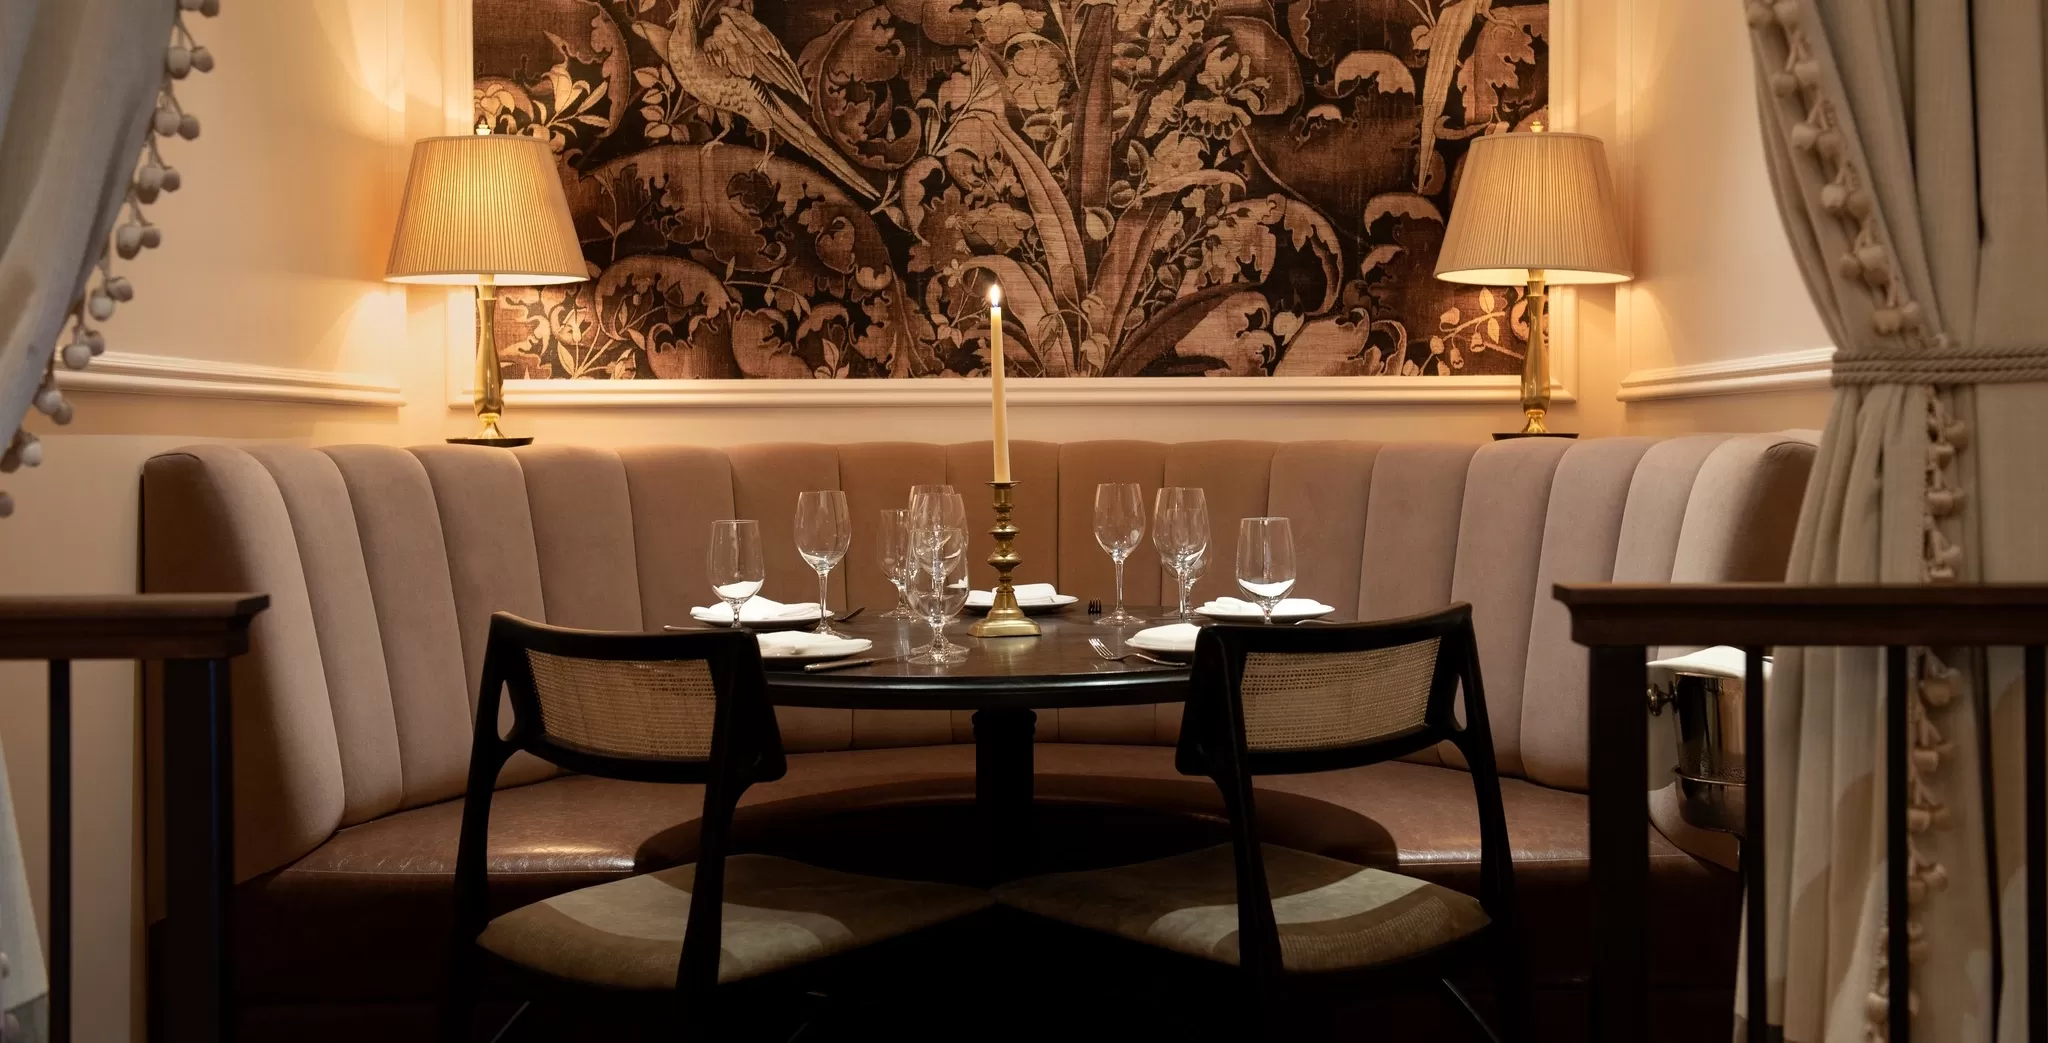 The 9 Most Romantic Restaurant Booths In New York City Quintessentially image image